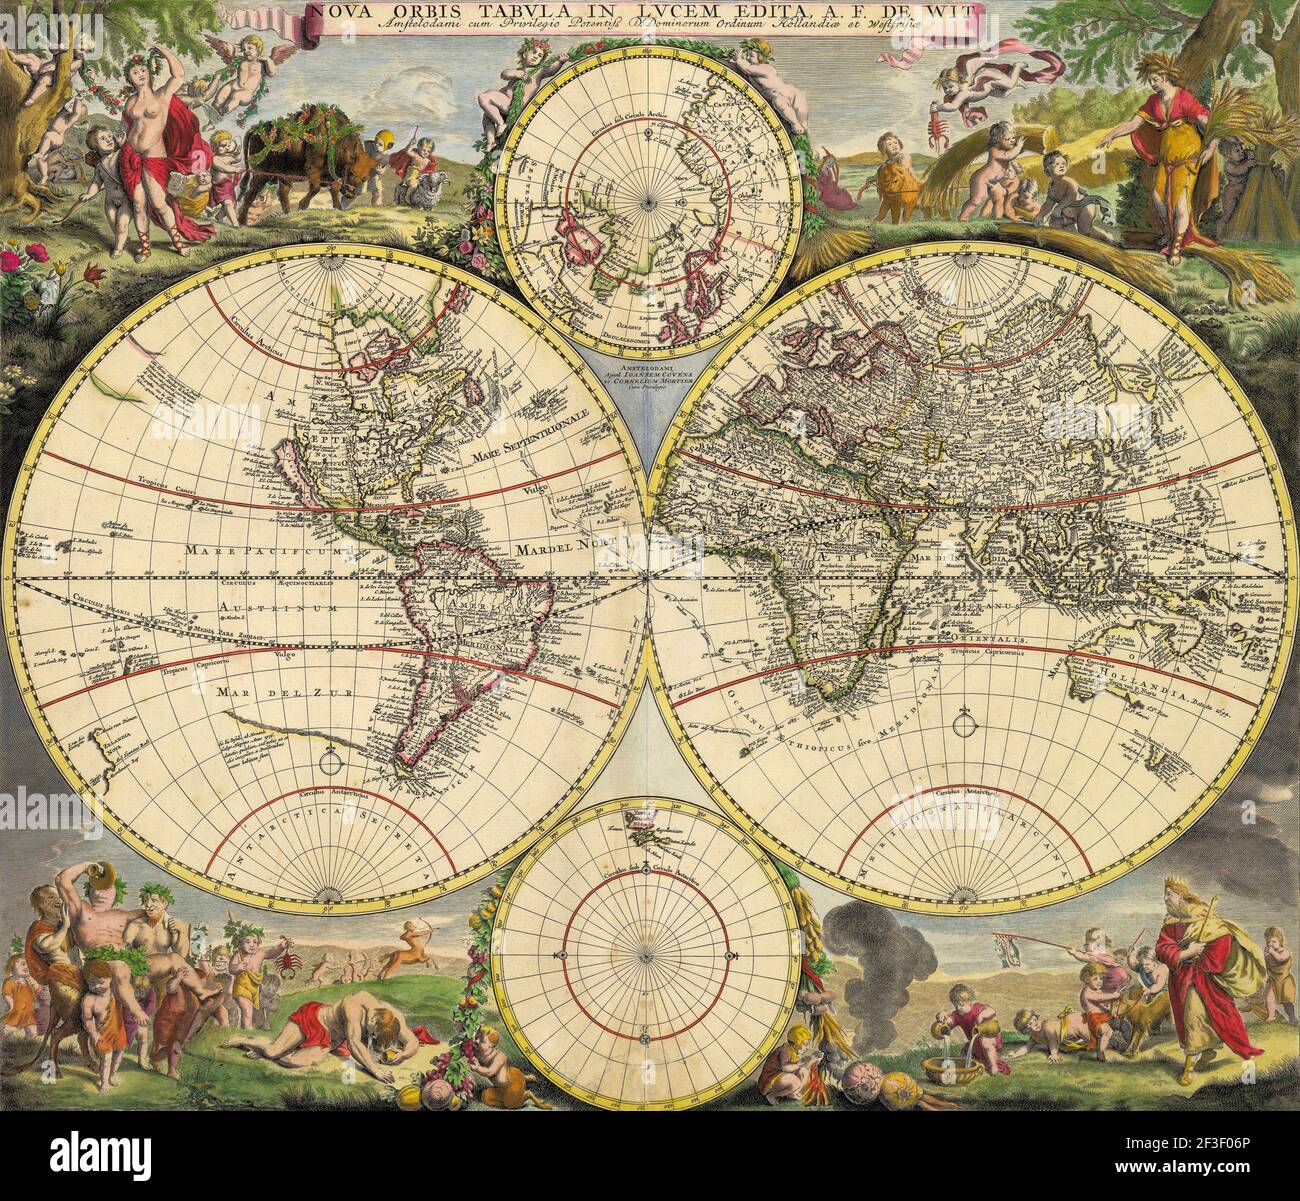 Old color lithography. Nova orbis tabvla in lvcem edita A. F. de Wit, World map by Frederick de Wit (1630-1706) Dutch mathematician and cartographer. Amsterdam, 17th century Stock Photo